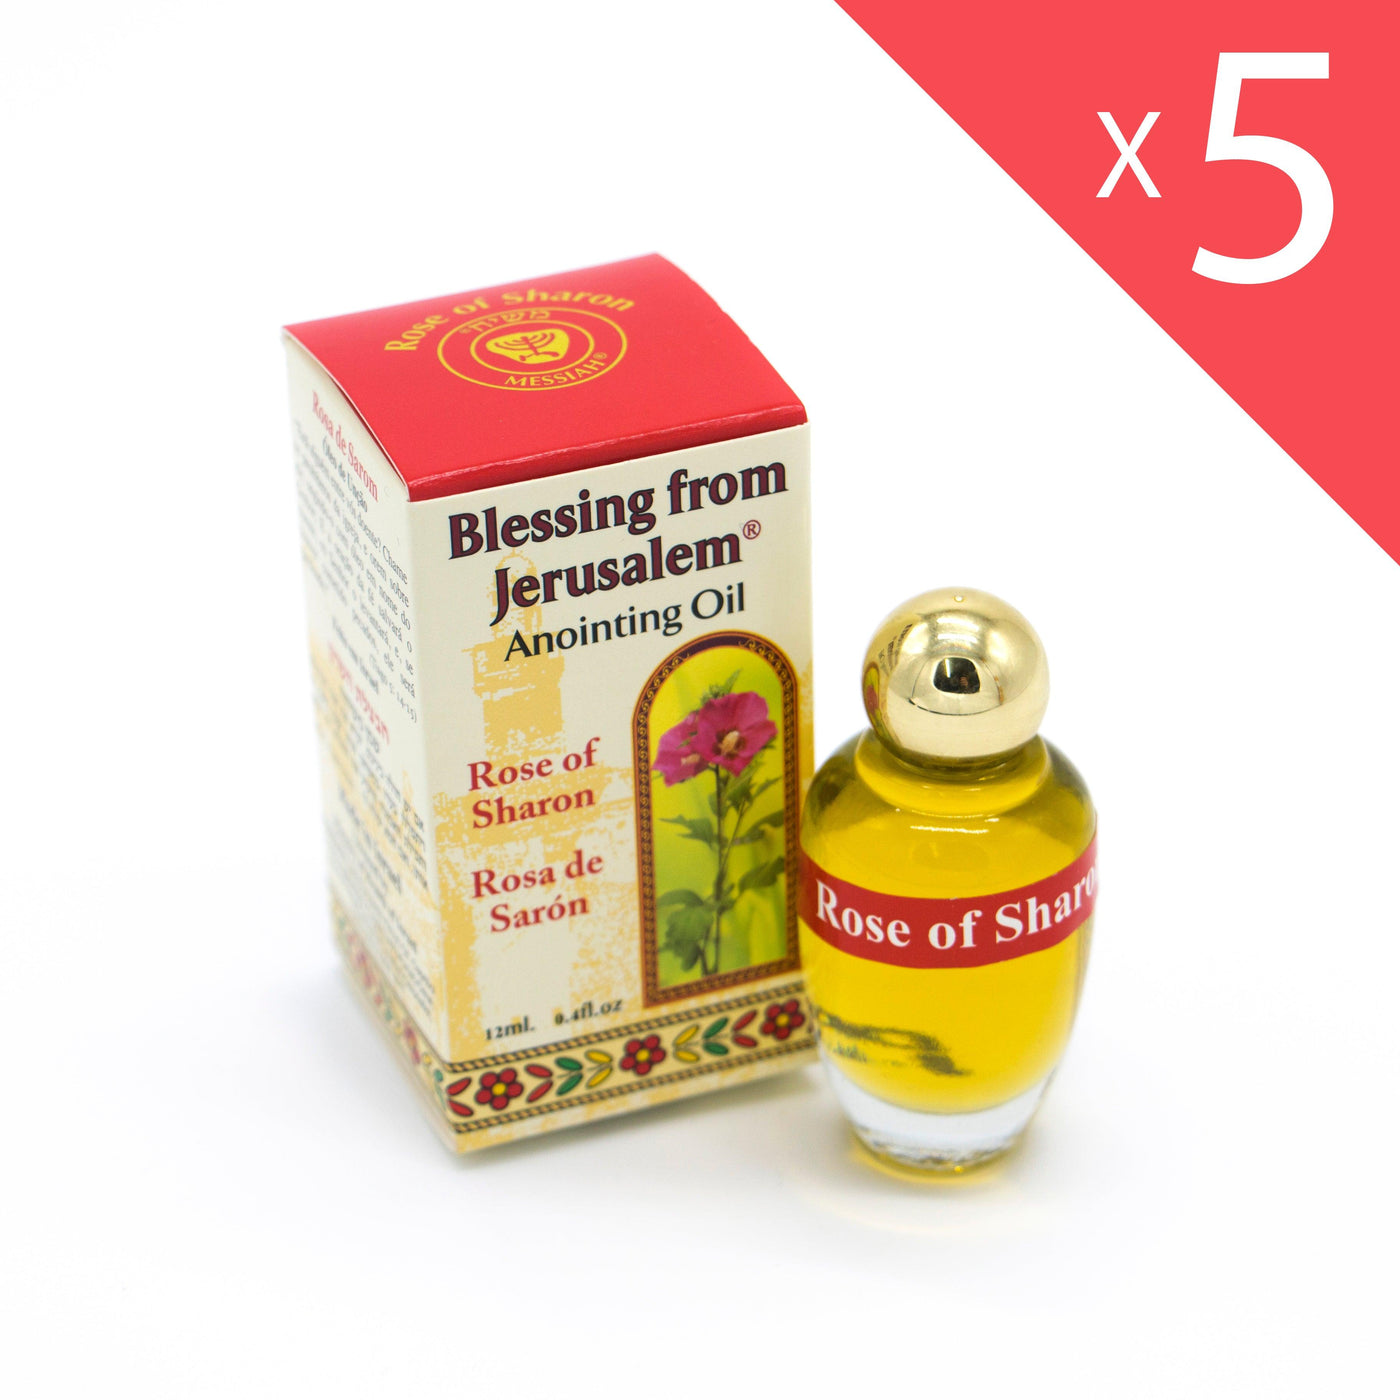 Lot of x 5 Anointing Oil Rose Of Sharon 12ml - 0.4oz From Holyland (5 bottles) - Spring Nahal